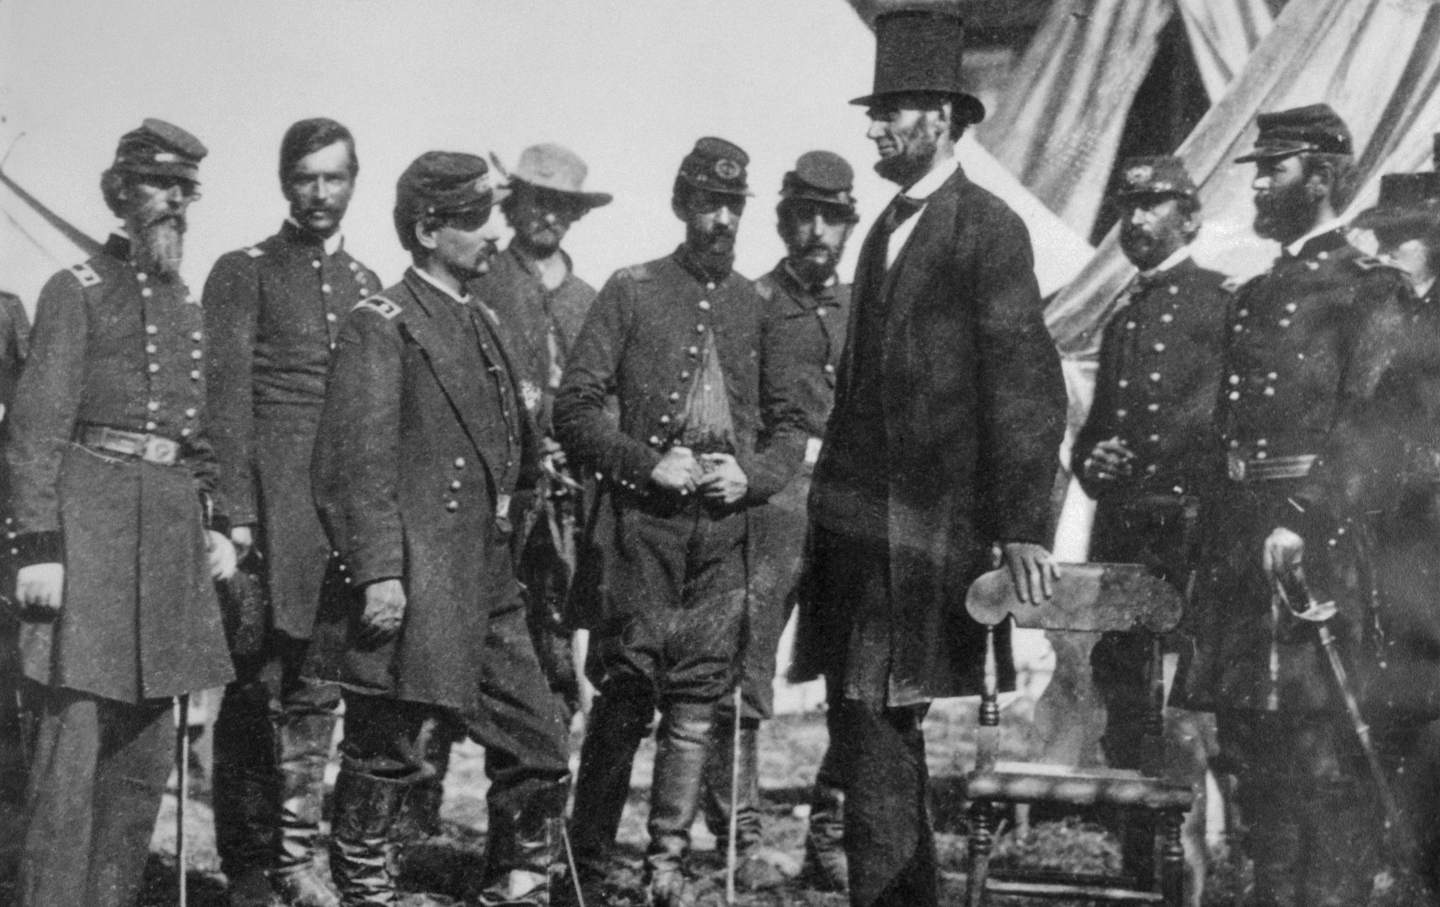 The Last Civil War Veterans Who Lived to Be Over 100… Or Did They